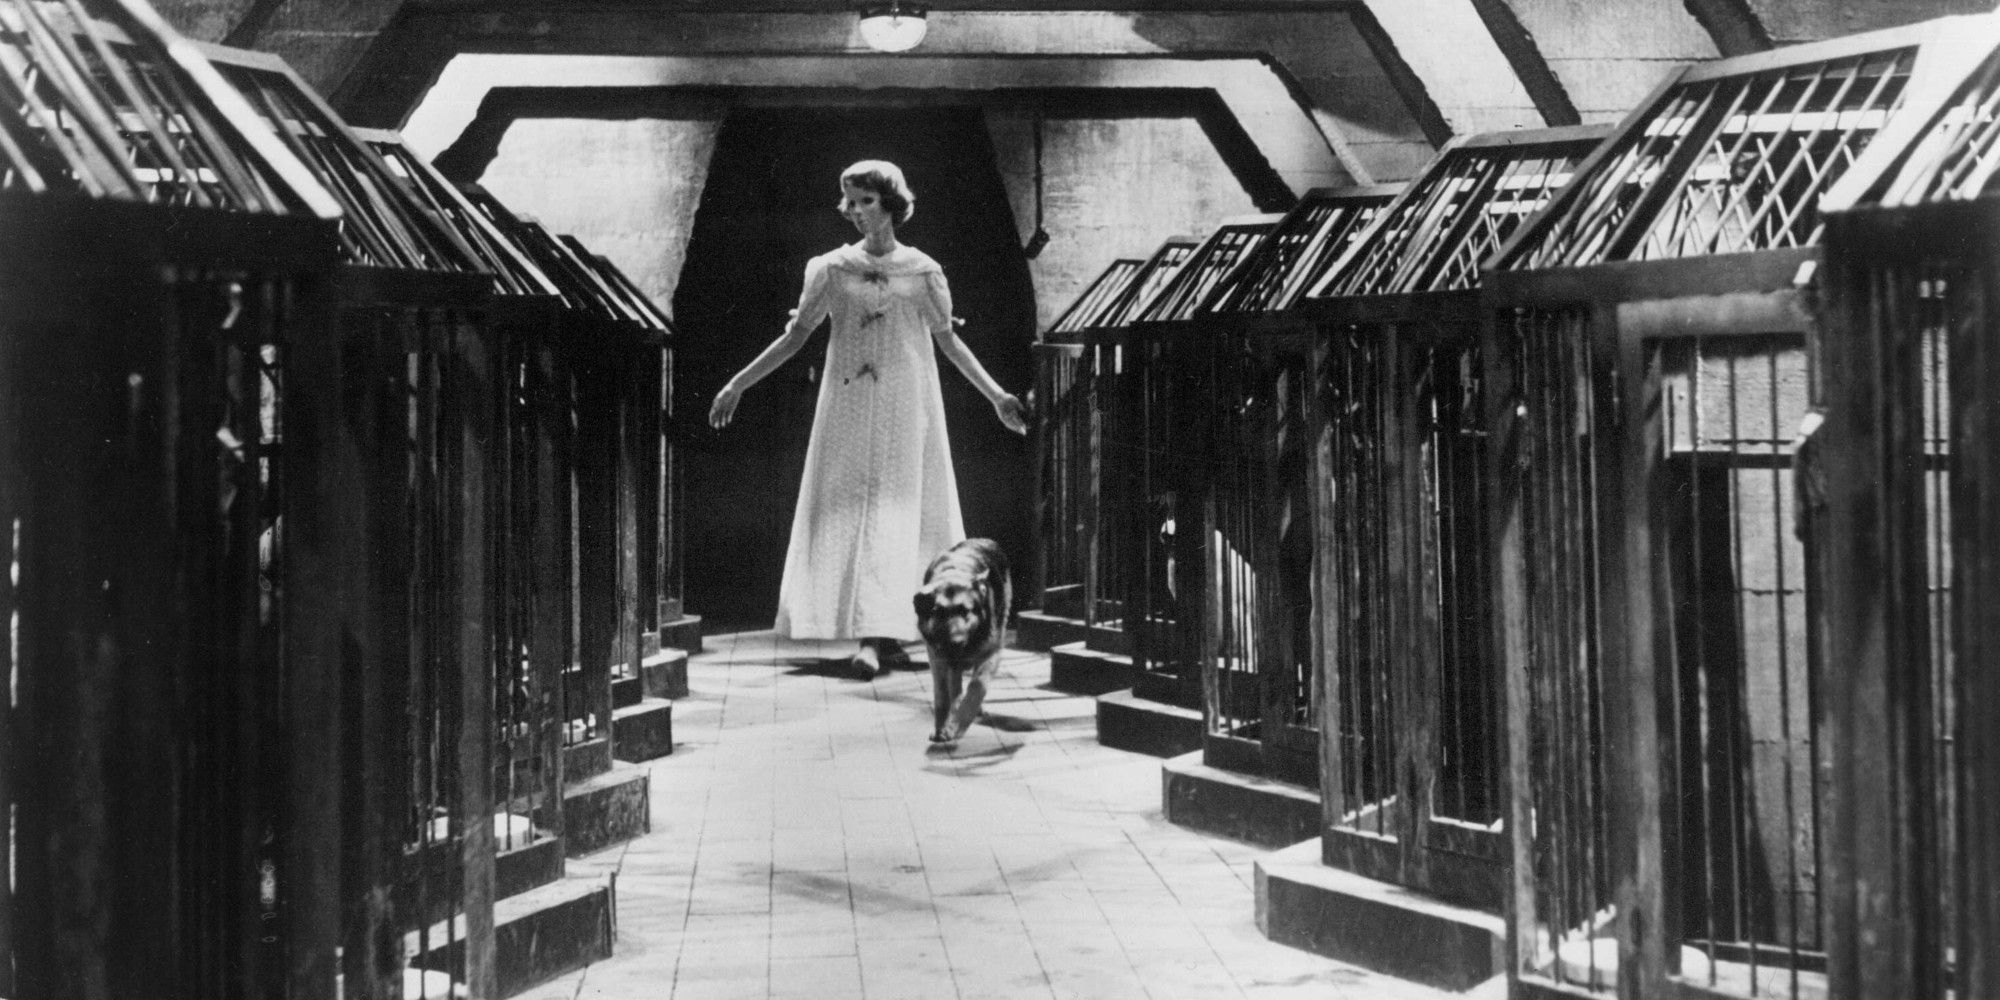 Edith Scob in the kennel in Eyes Without a Face